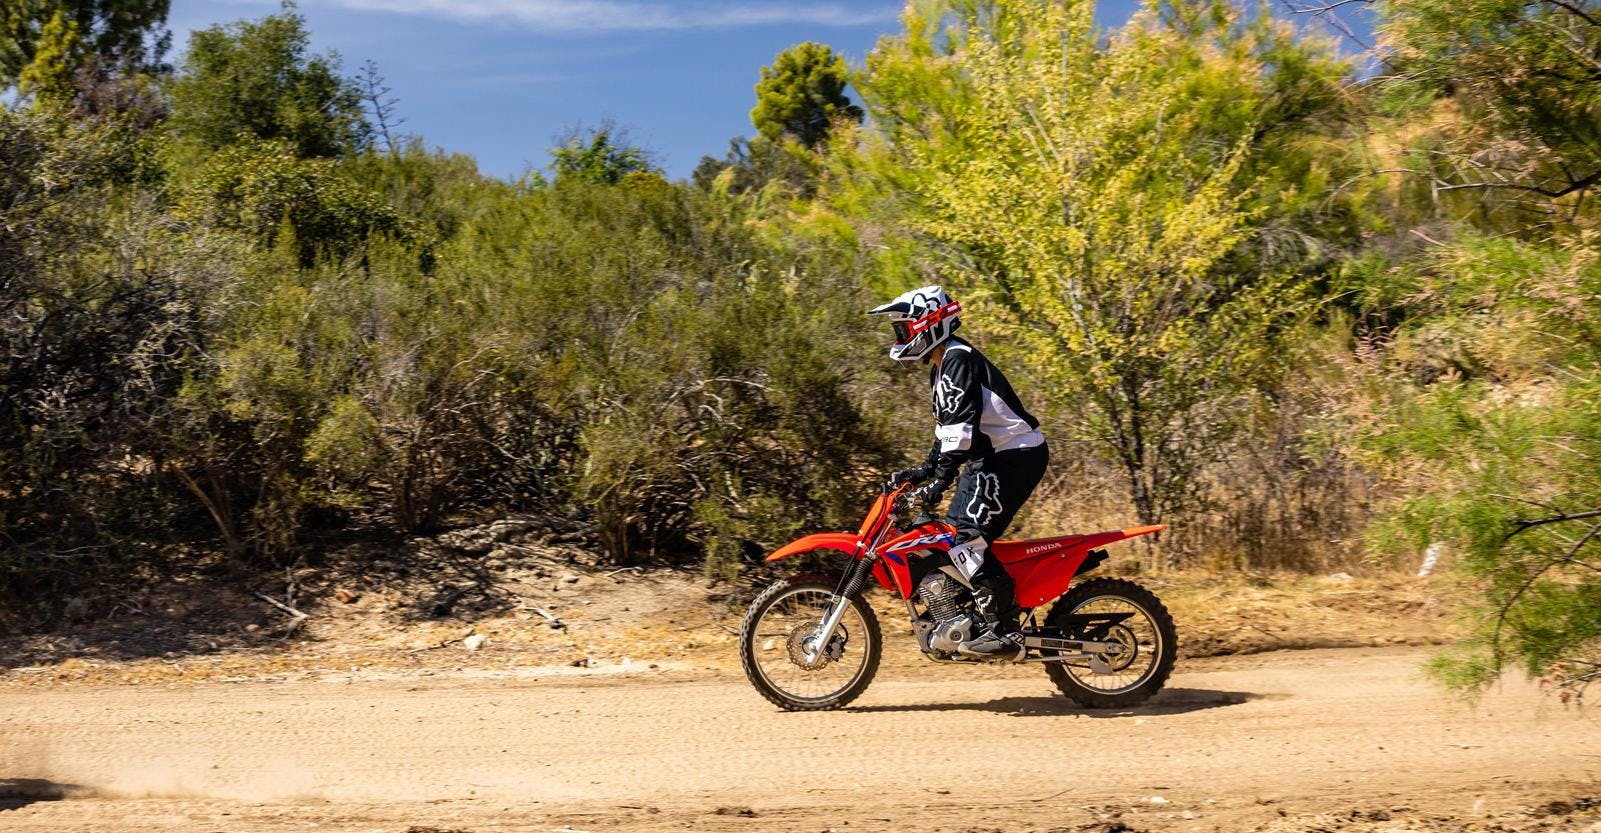 Honda CRF125F in extreme red colour on off road track